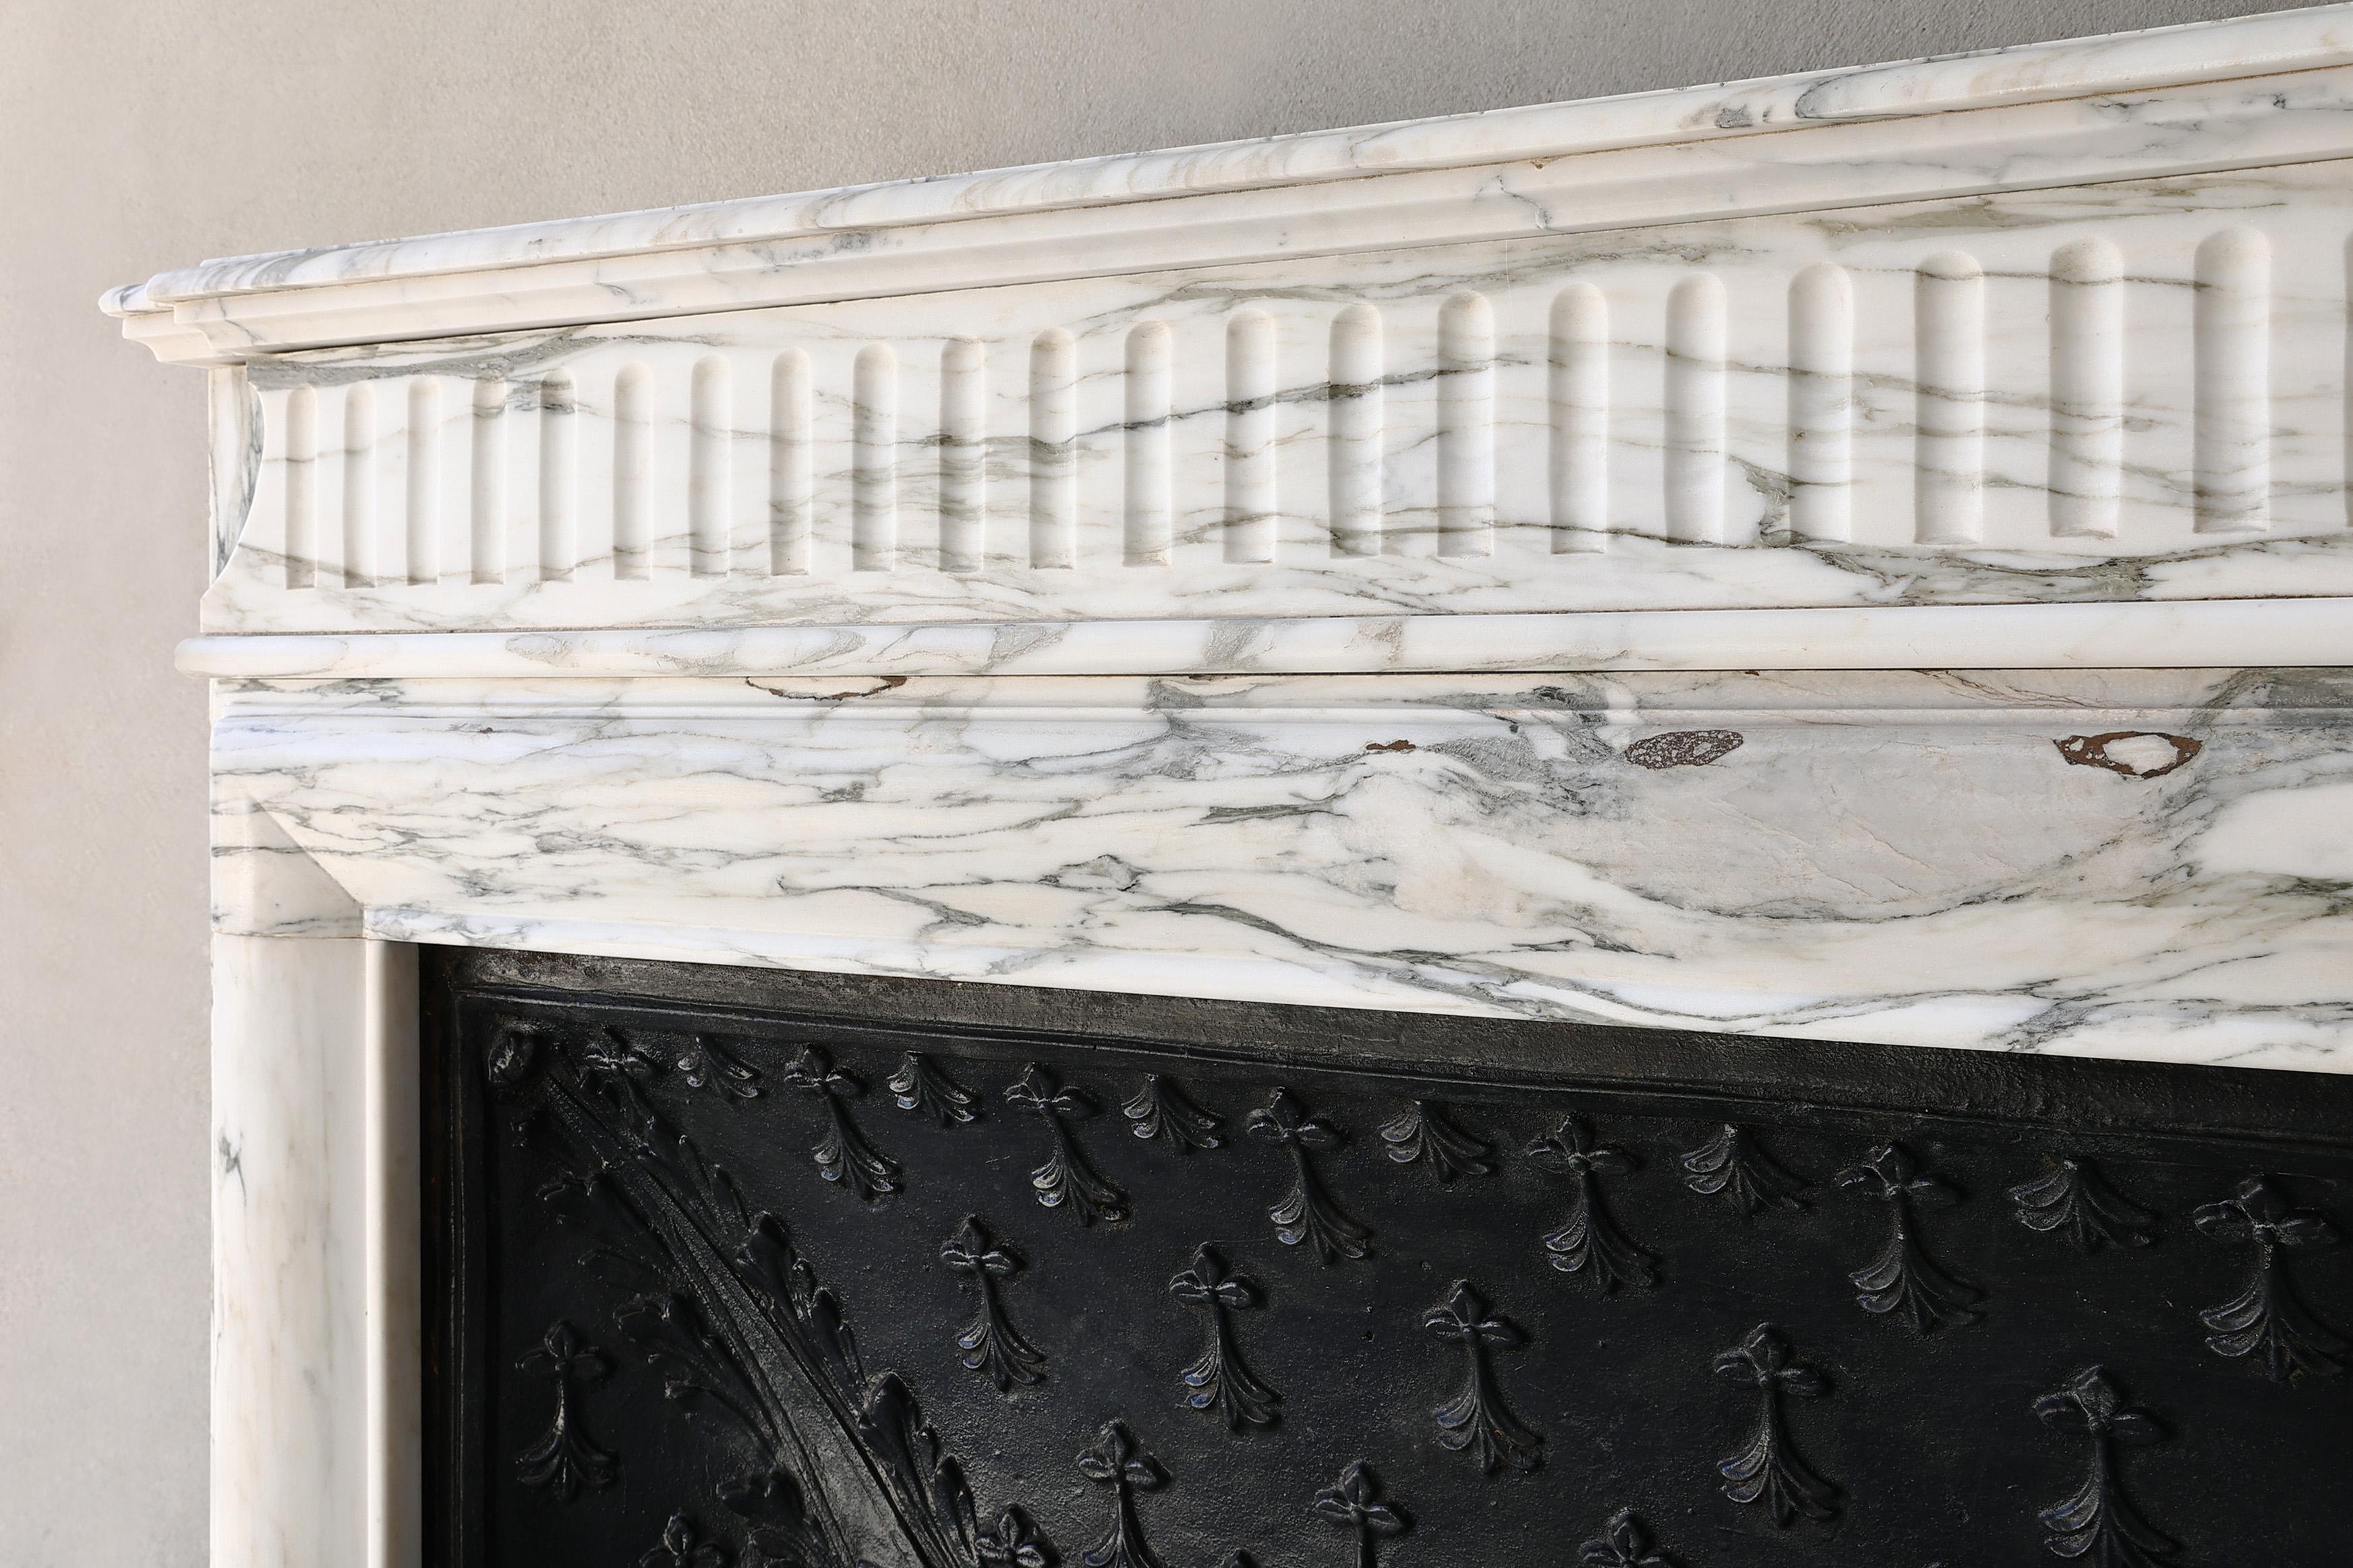 Marble Carrara marble fireplace from the 19th century in style of Louis XIV